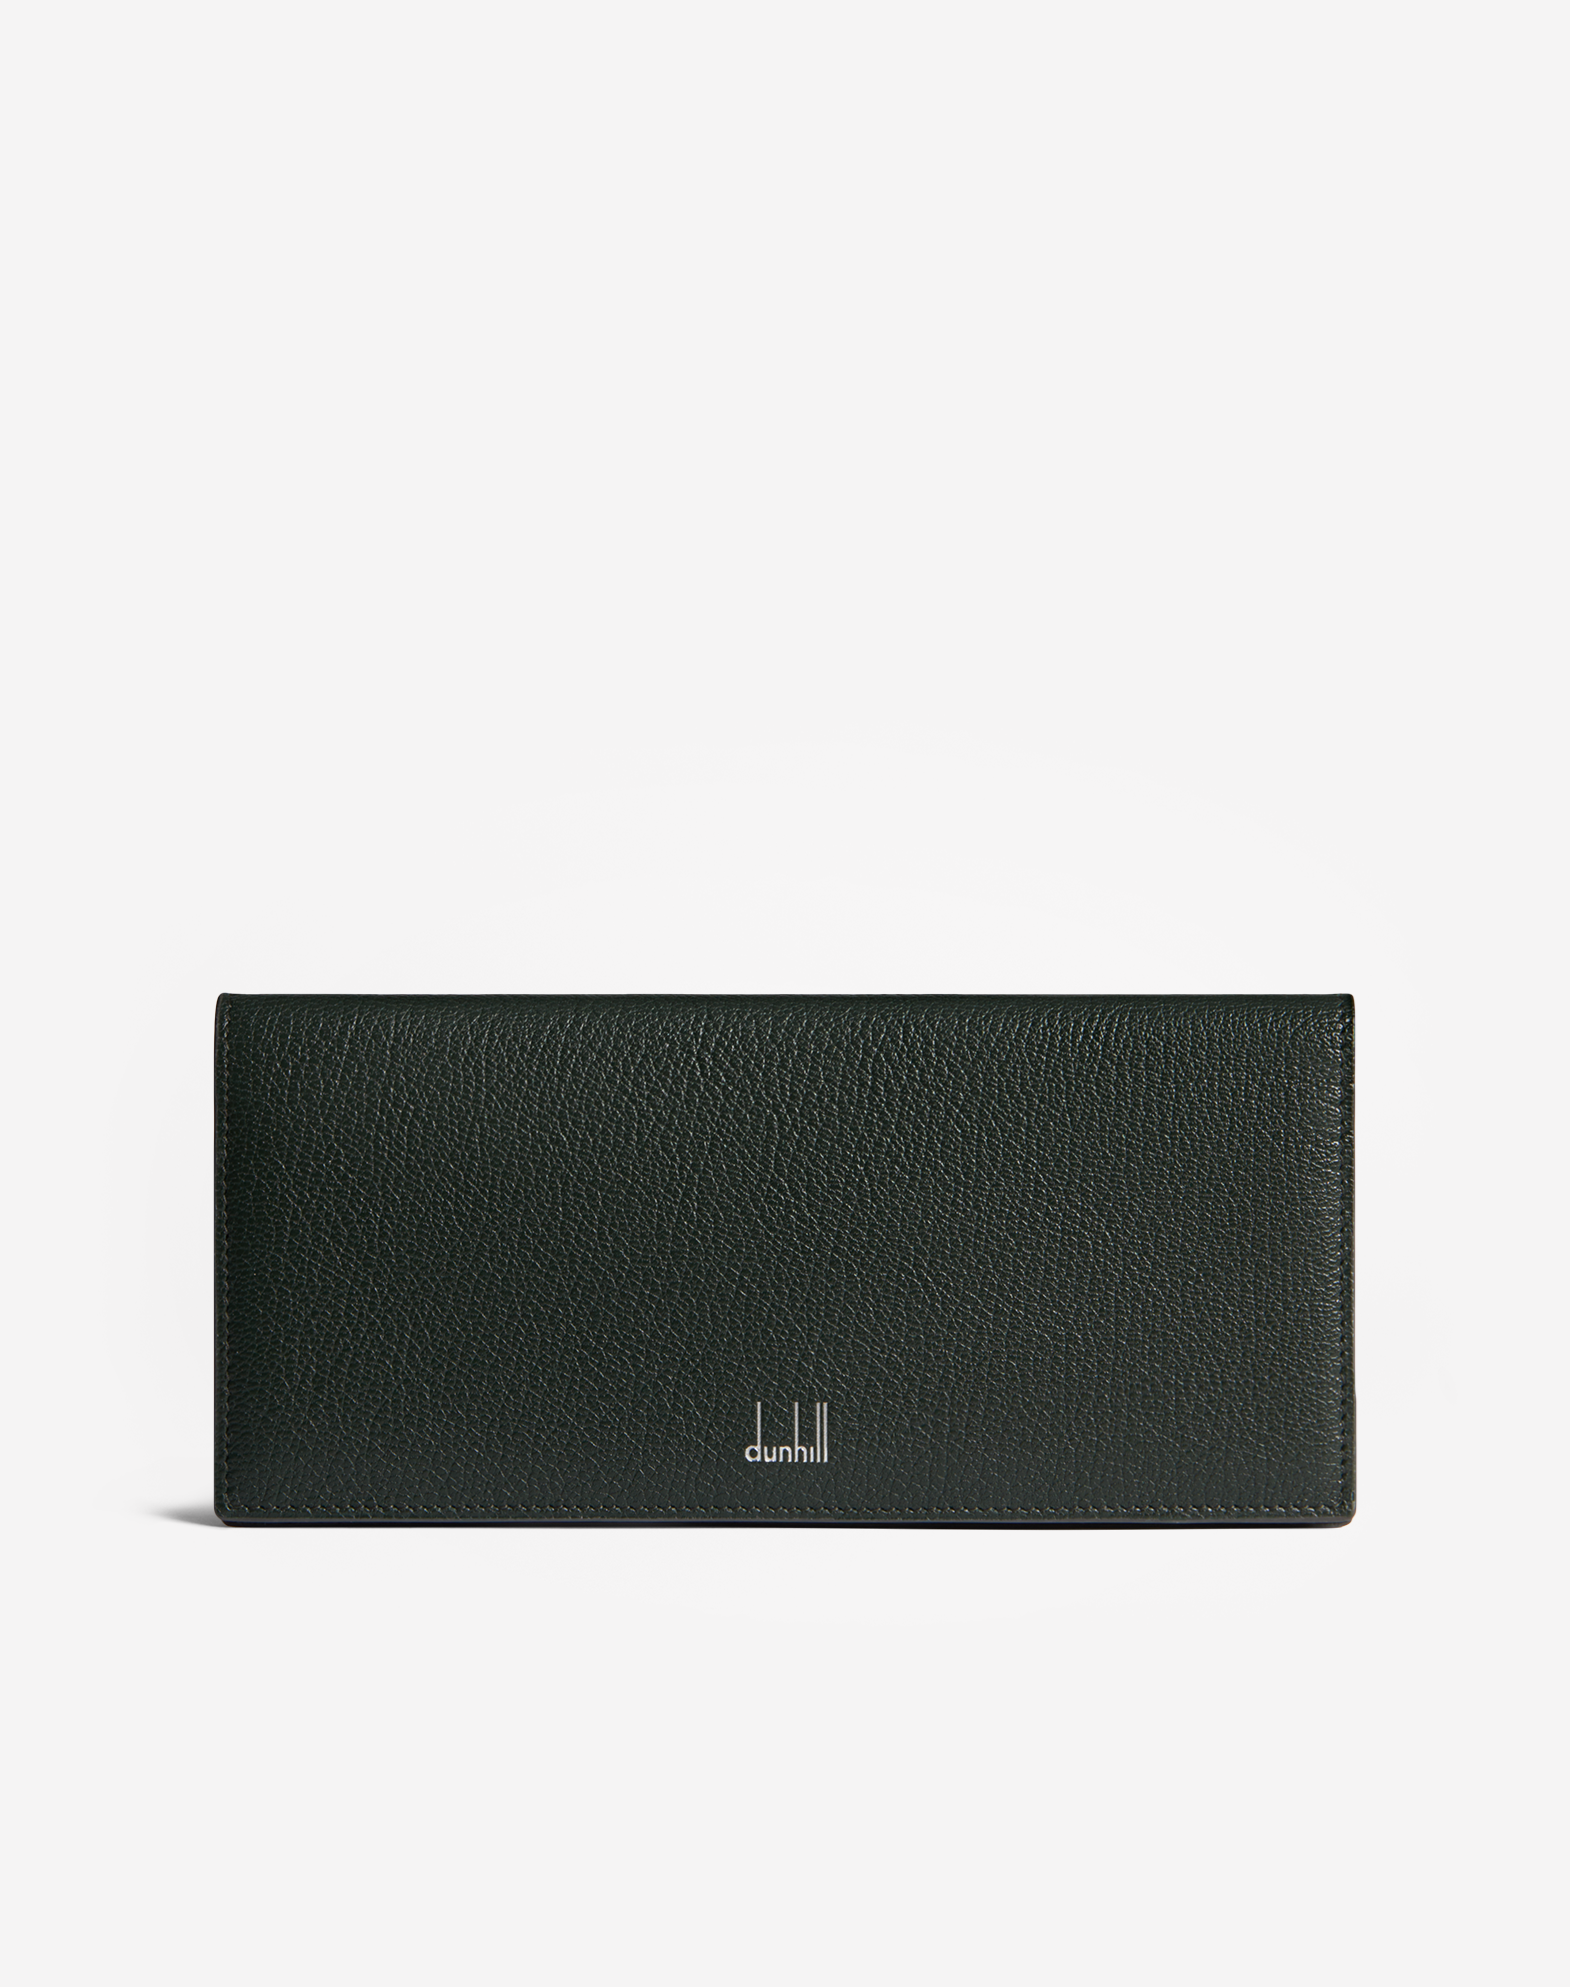 Dunhill Duke Fine Leather 10cc Coat Wallet In Green